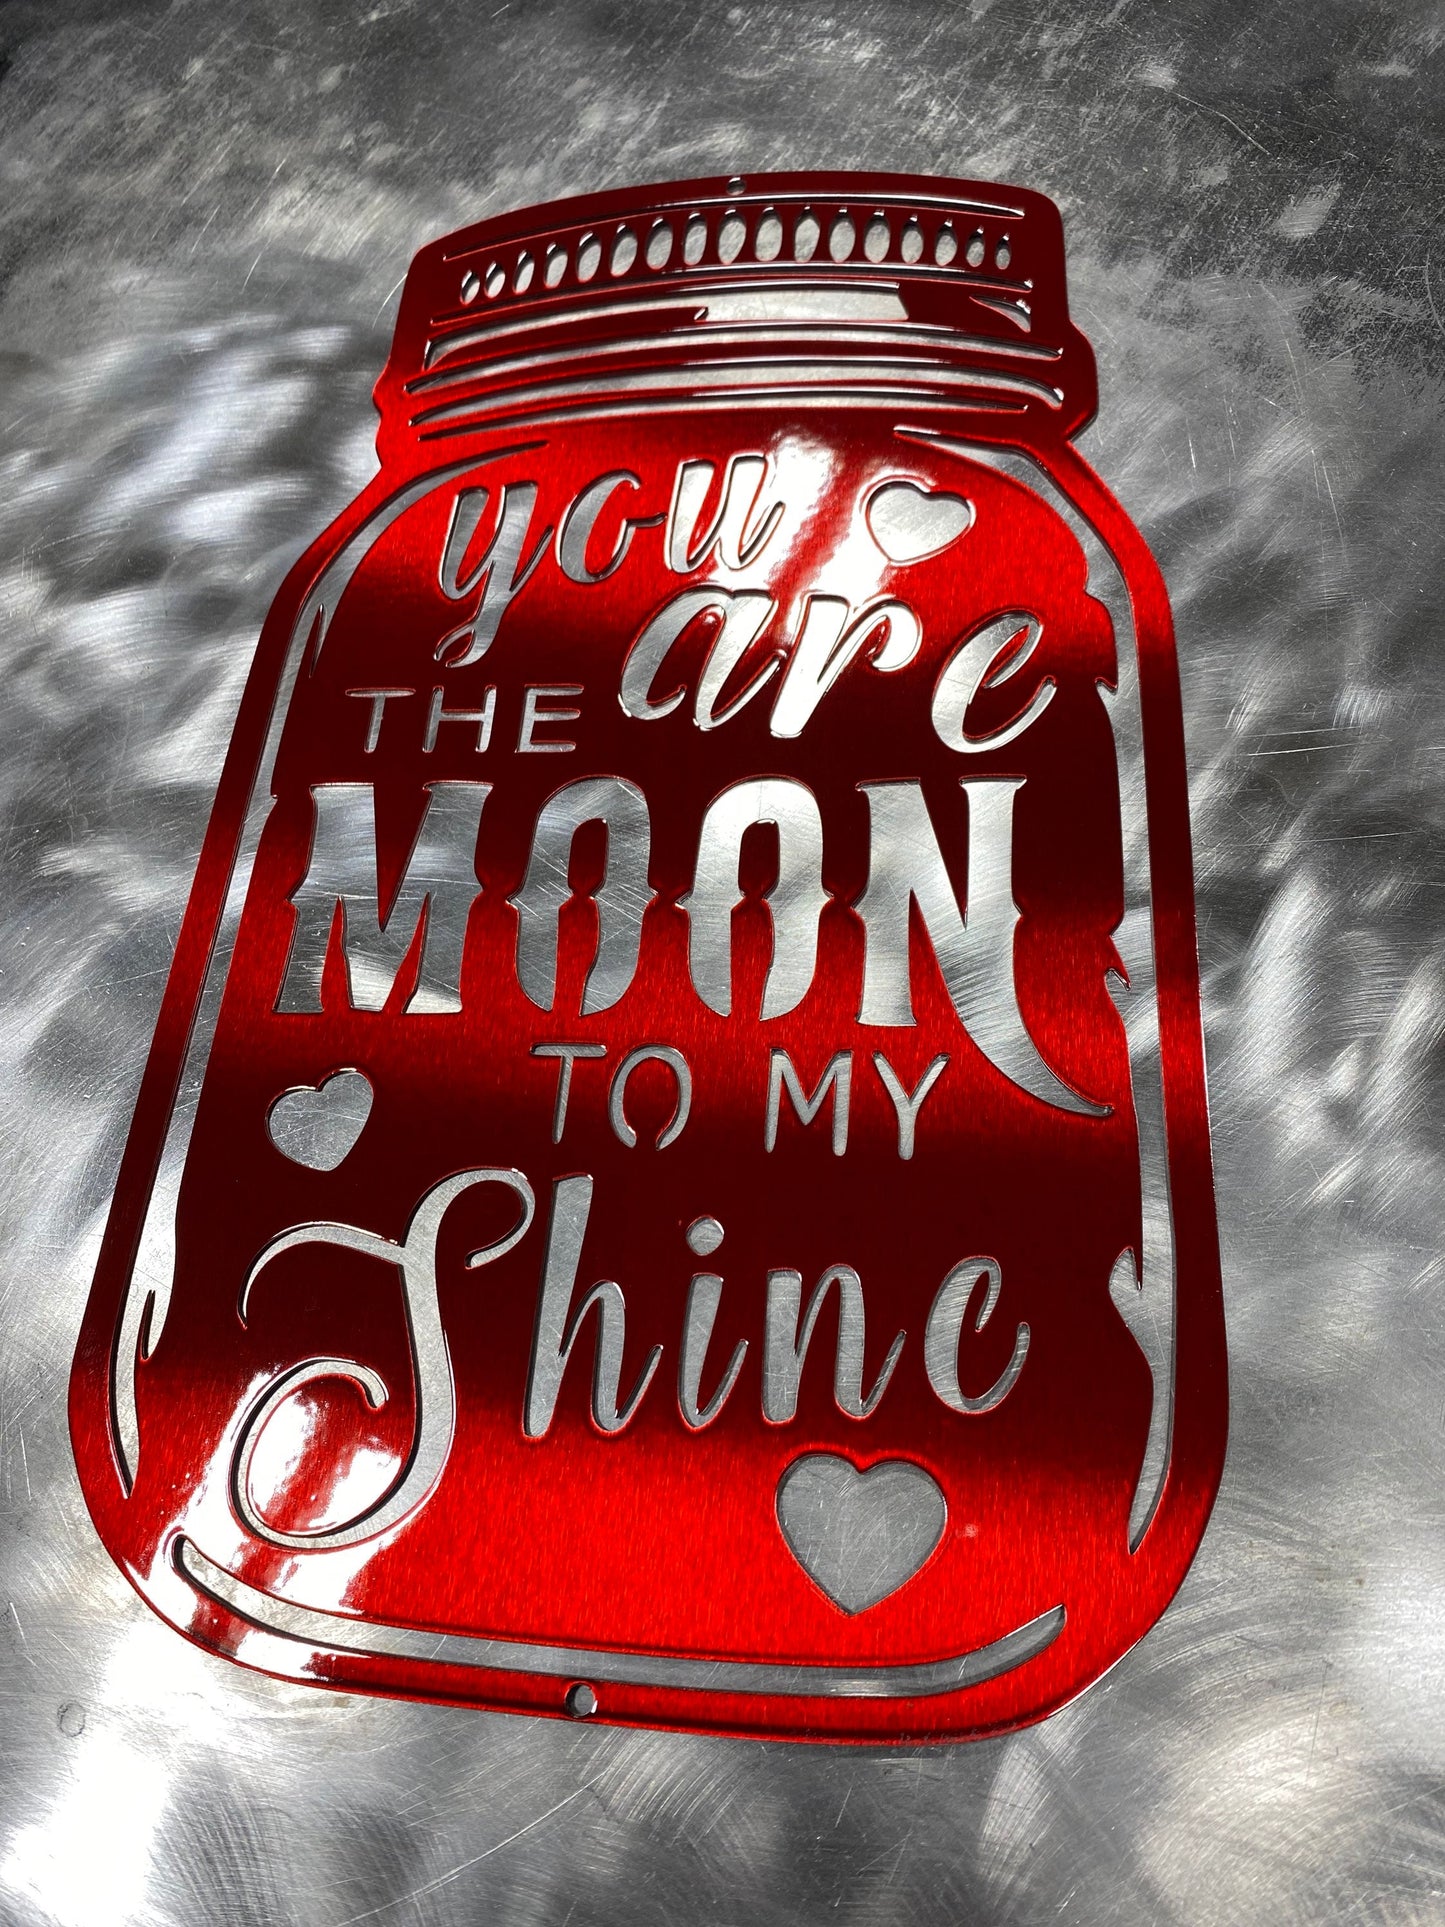 You are the moon to my shine! Valentine’s Day gift, Mother’s Day gift, anniversary gift